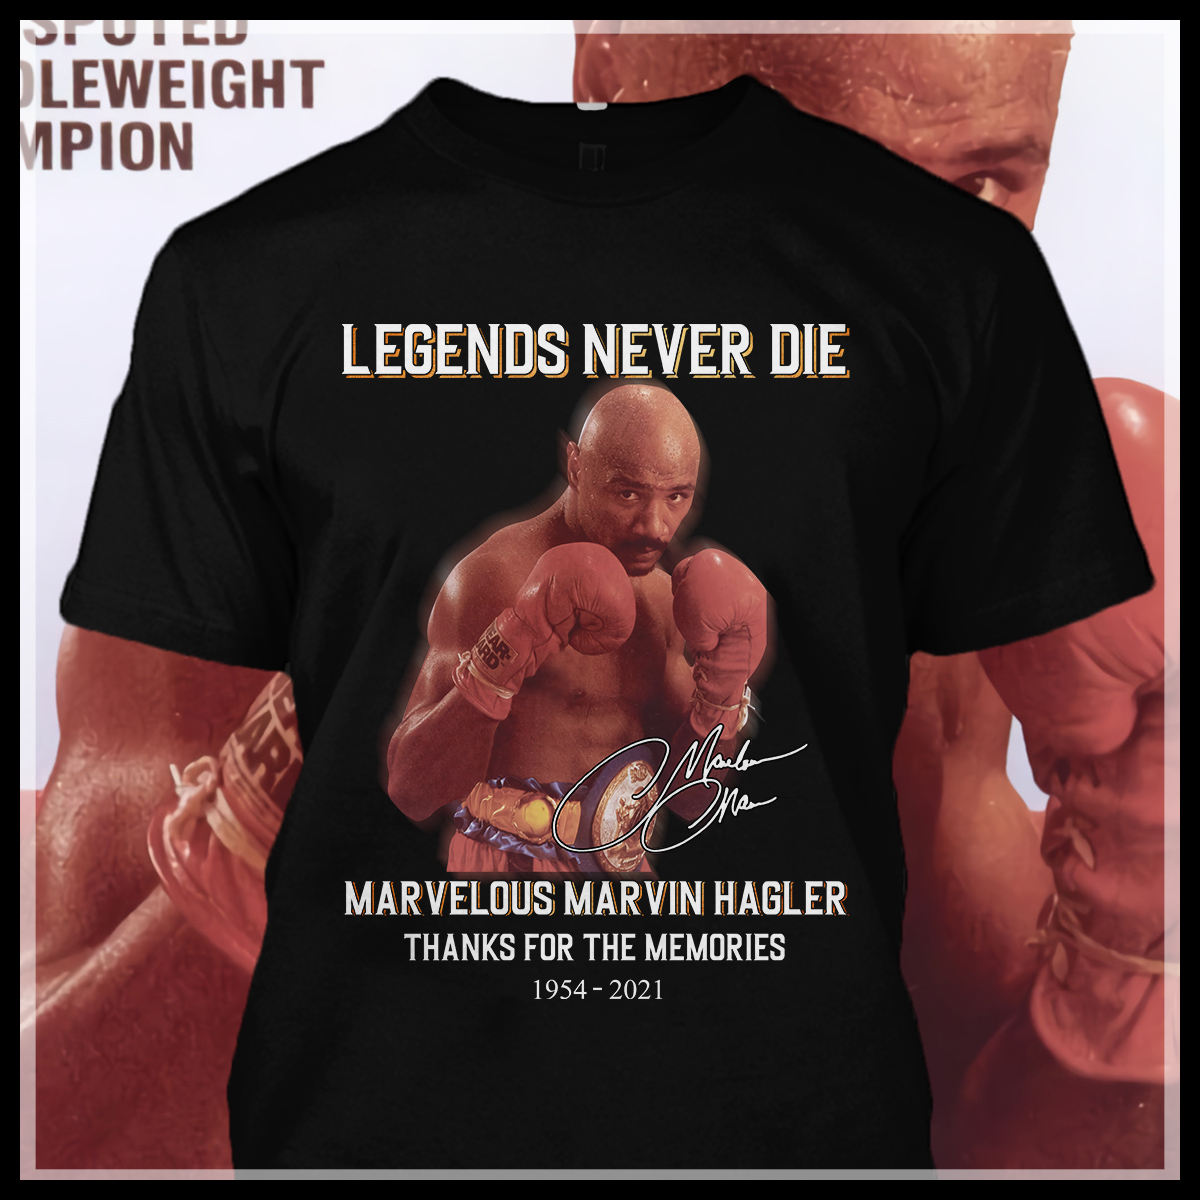 Legends never die- Marvelous Marvin Hagler thank you for the memories from 1954 to 2021